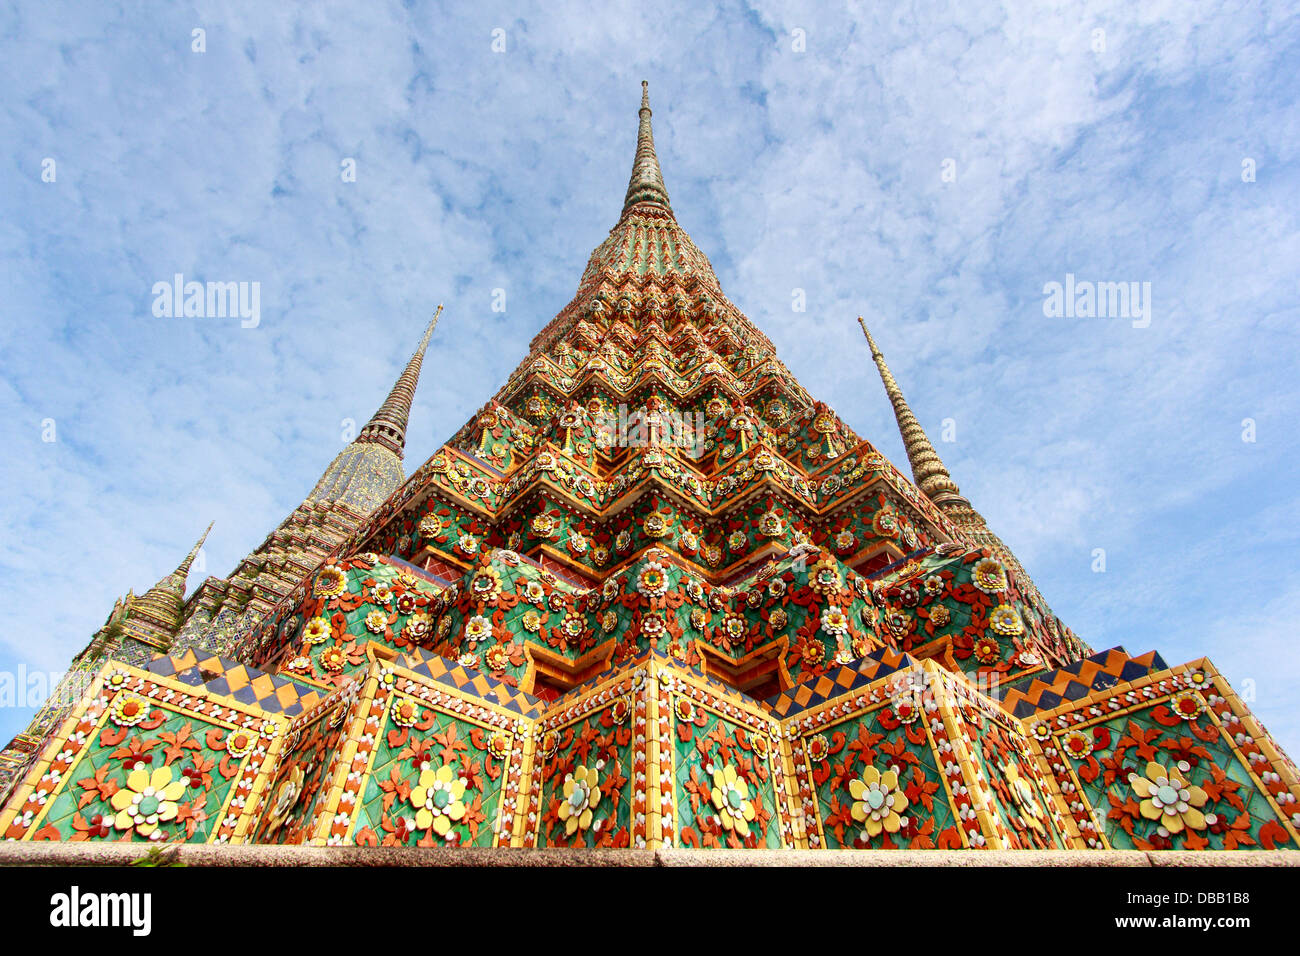 Wat Pho, Bangkok, Thailand. 'Wat' means temple in Thai. The temple is one of Bangkok's most famous tourist sites. Stock Photo